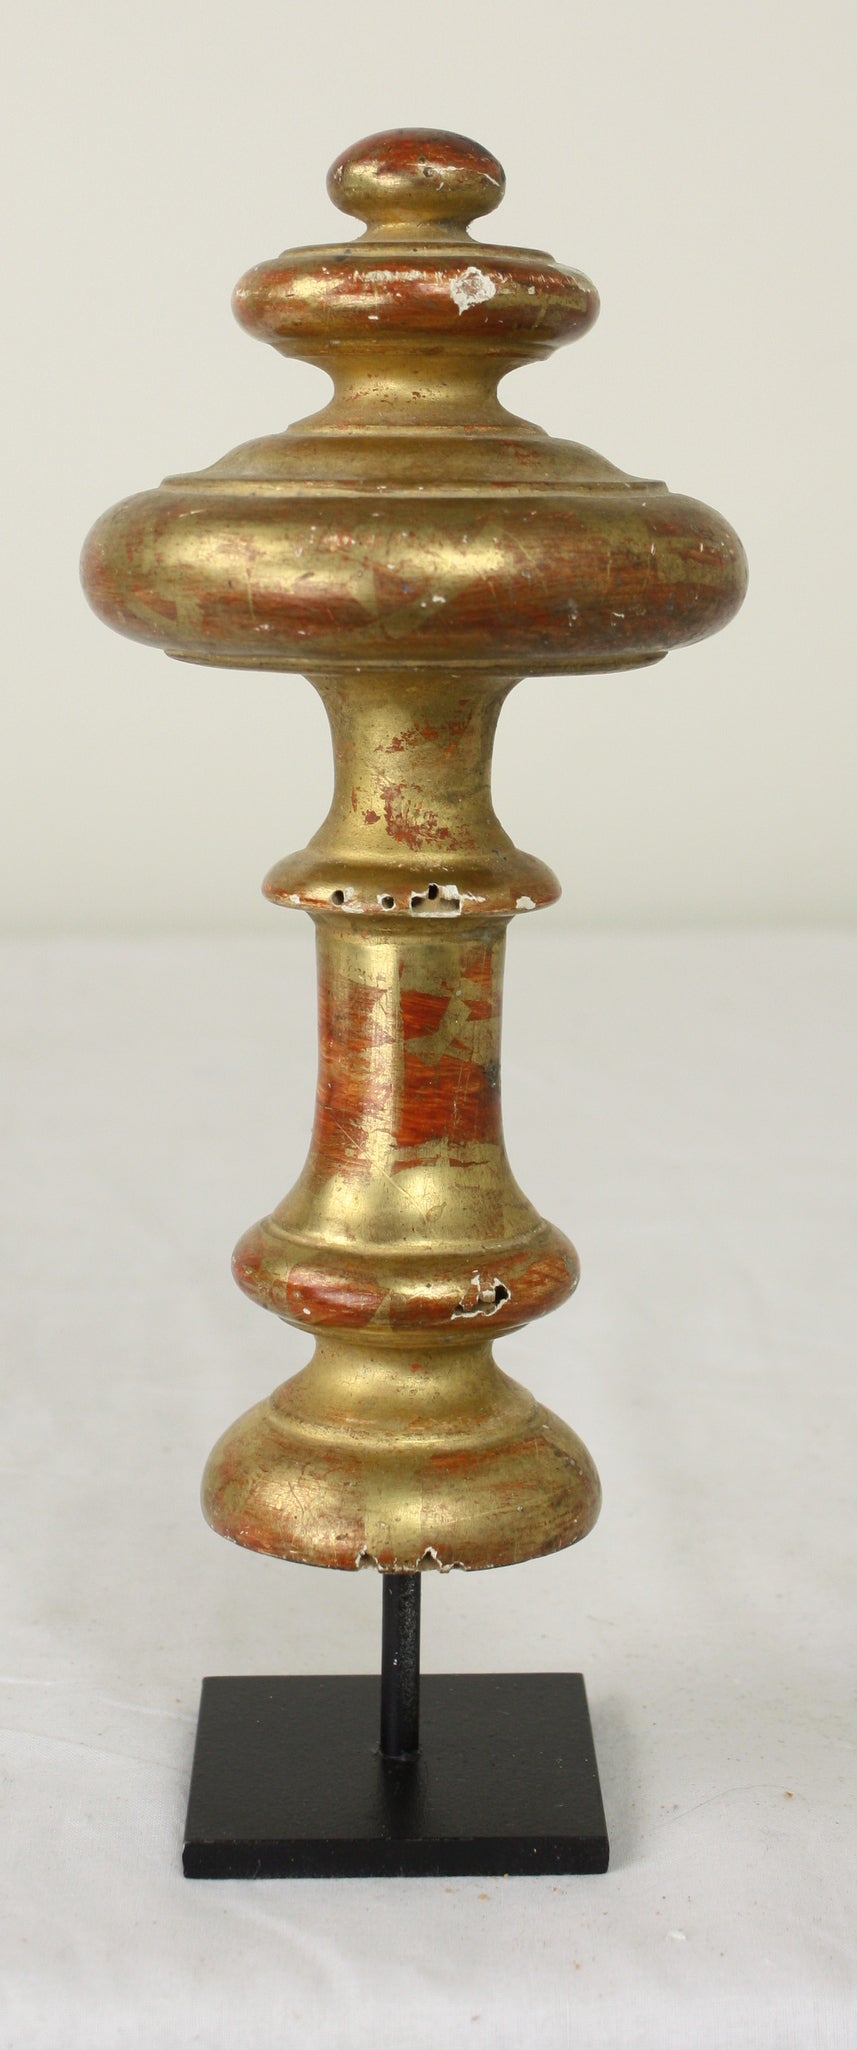 A collection of five gilded French finials, lovely decorations on new graceful hand-made stands.   There is some red base show-thru, common on gilded wood.  These are architecturally interesting, and shiny and pretty.  Very nice on a shelf or